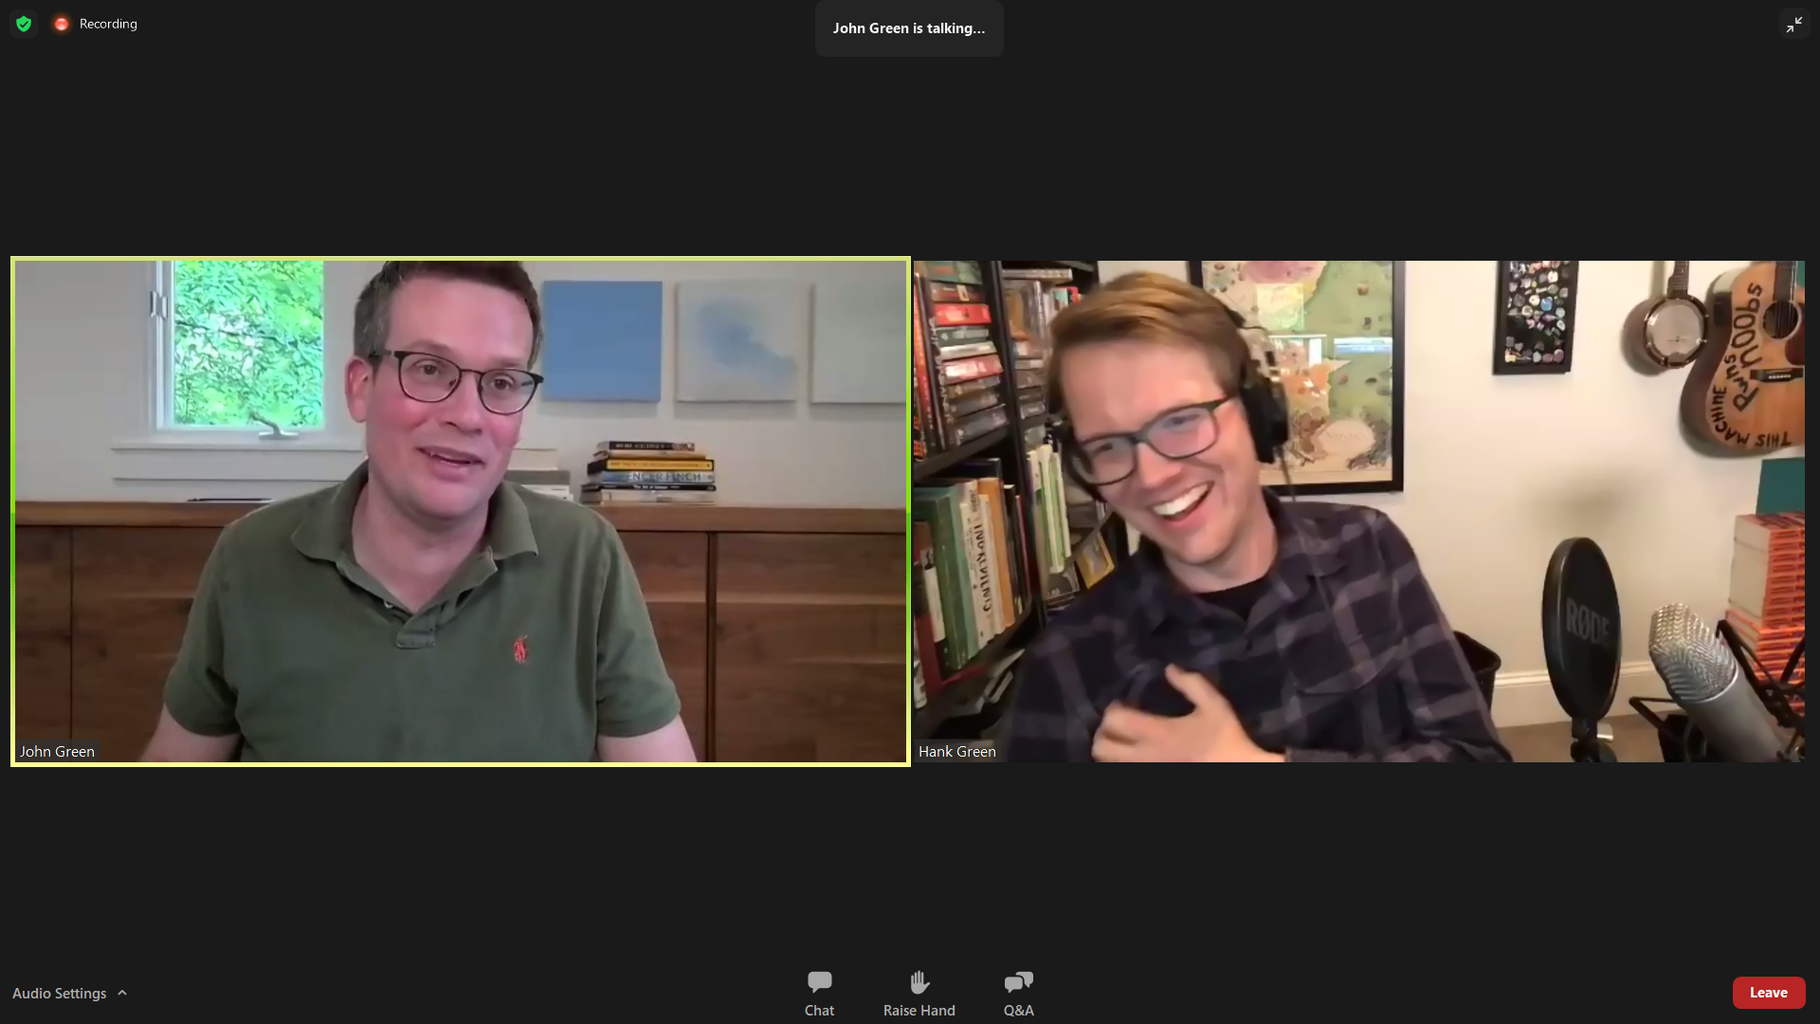 Screenshot of John Green and Hank Green taken via Zoom during a leg of his book tour for \"The Anthropocene Reviewed\"